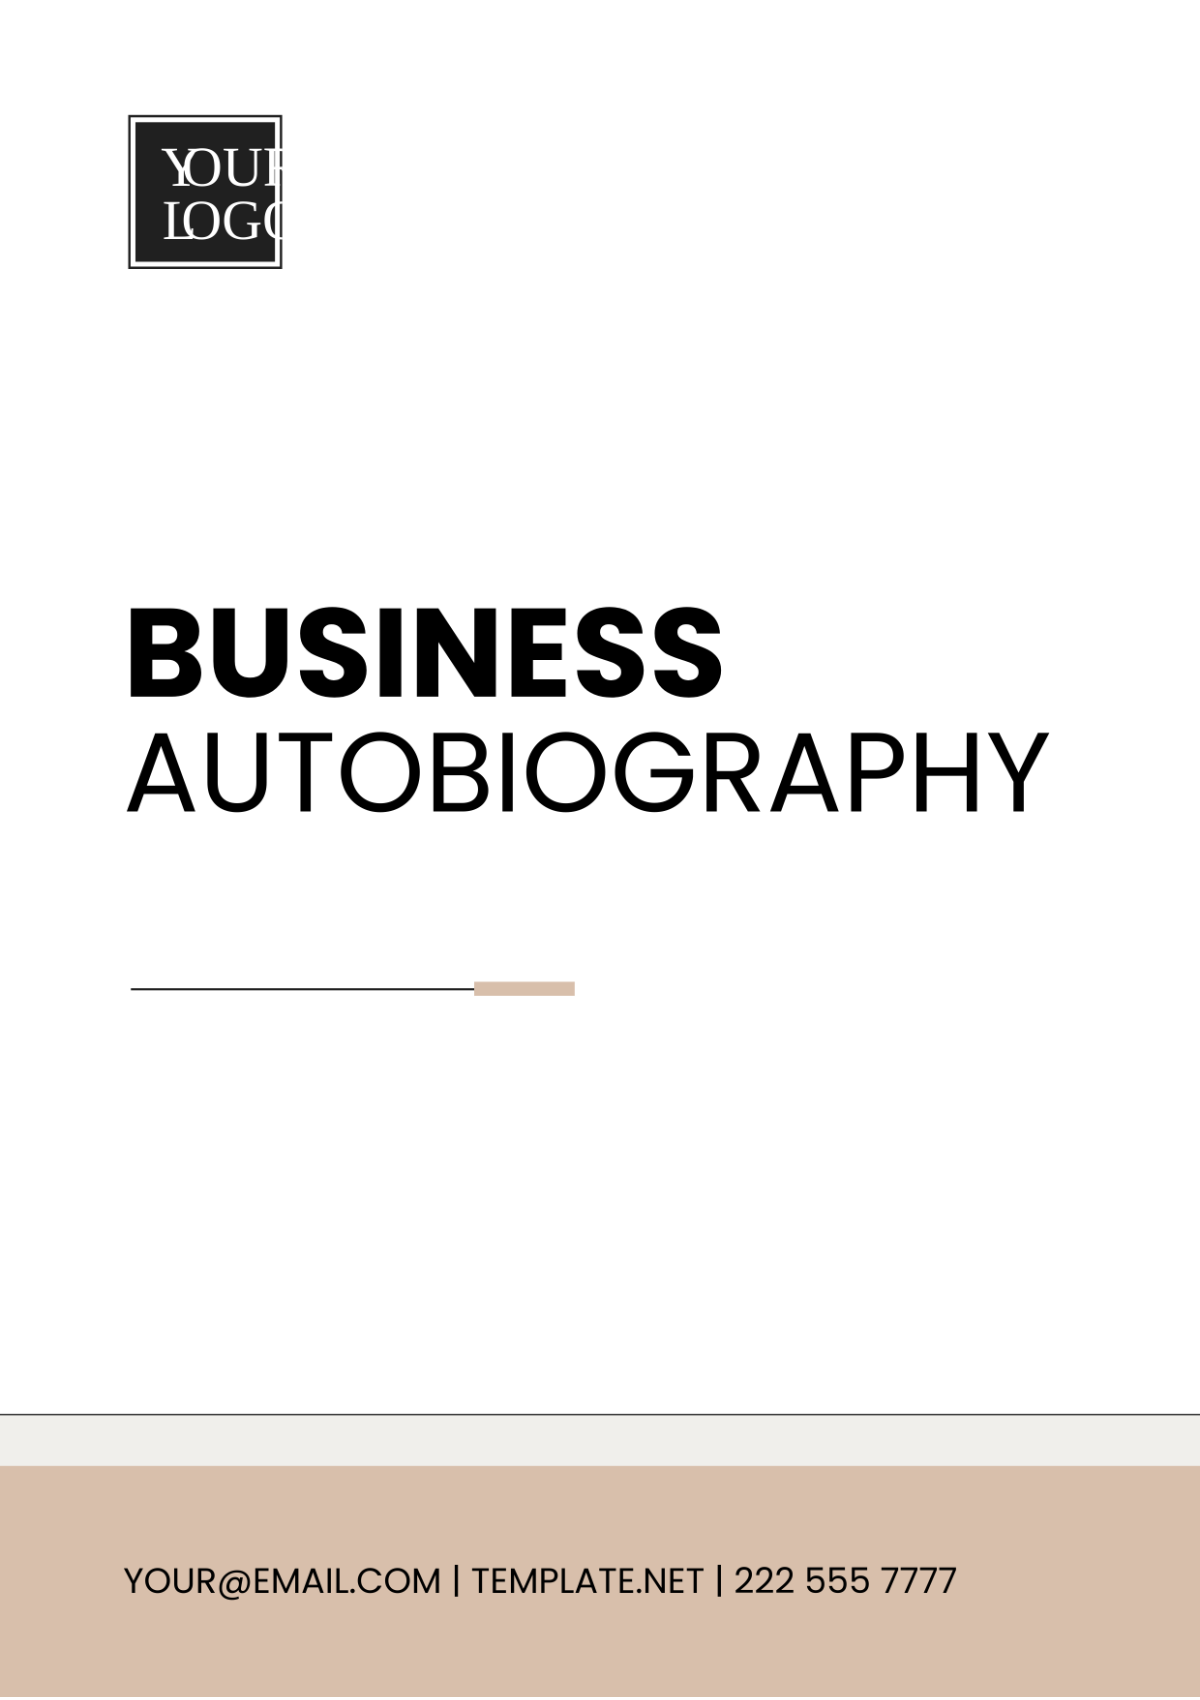 Business Autobiography Template